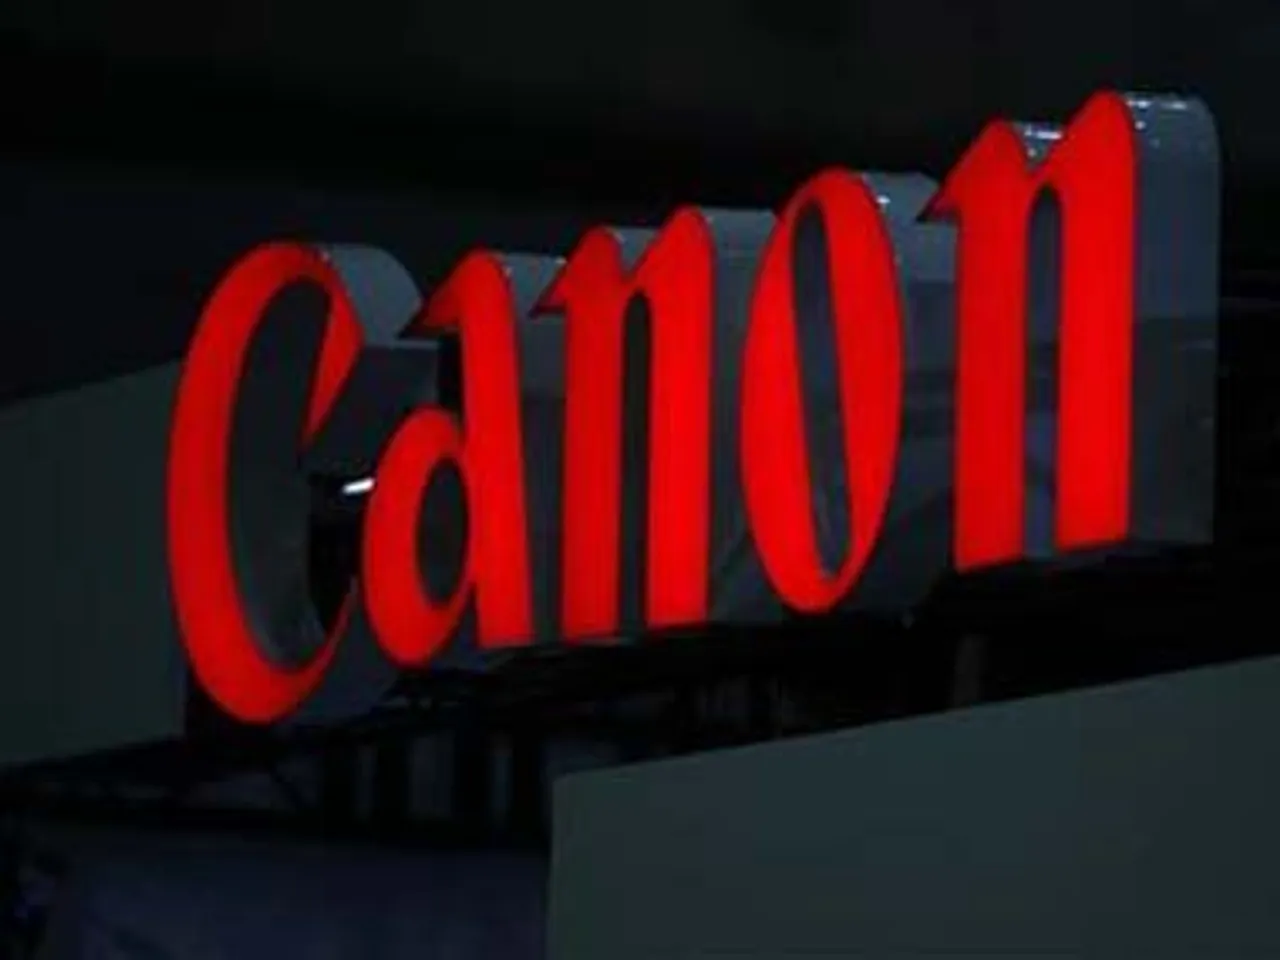 Canon endeavours to protect the environment; powers off for Earth hour 2015